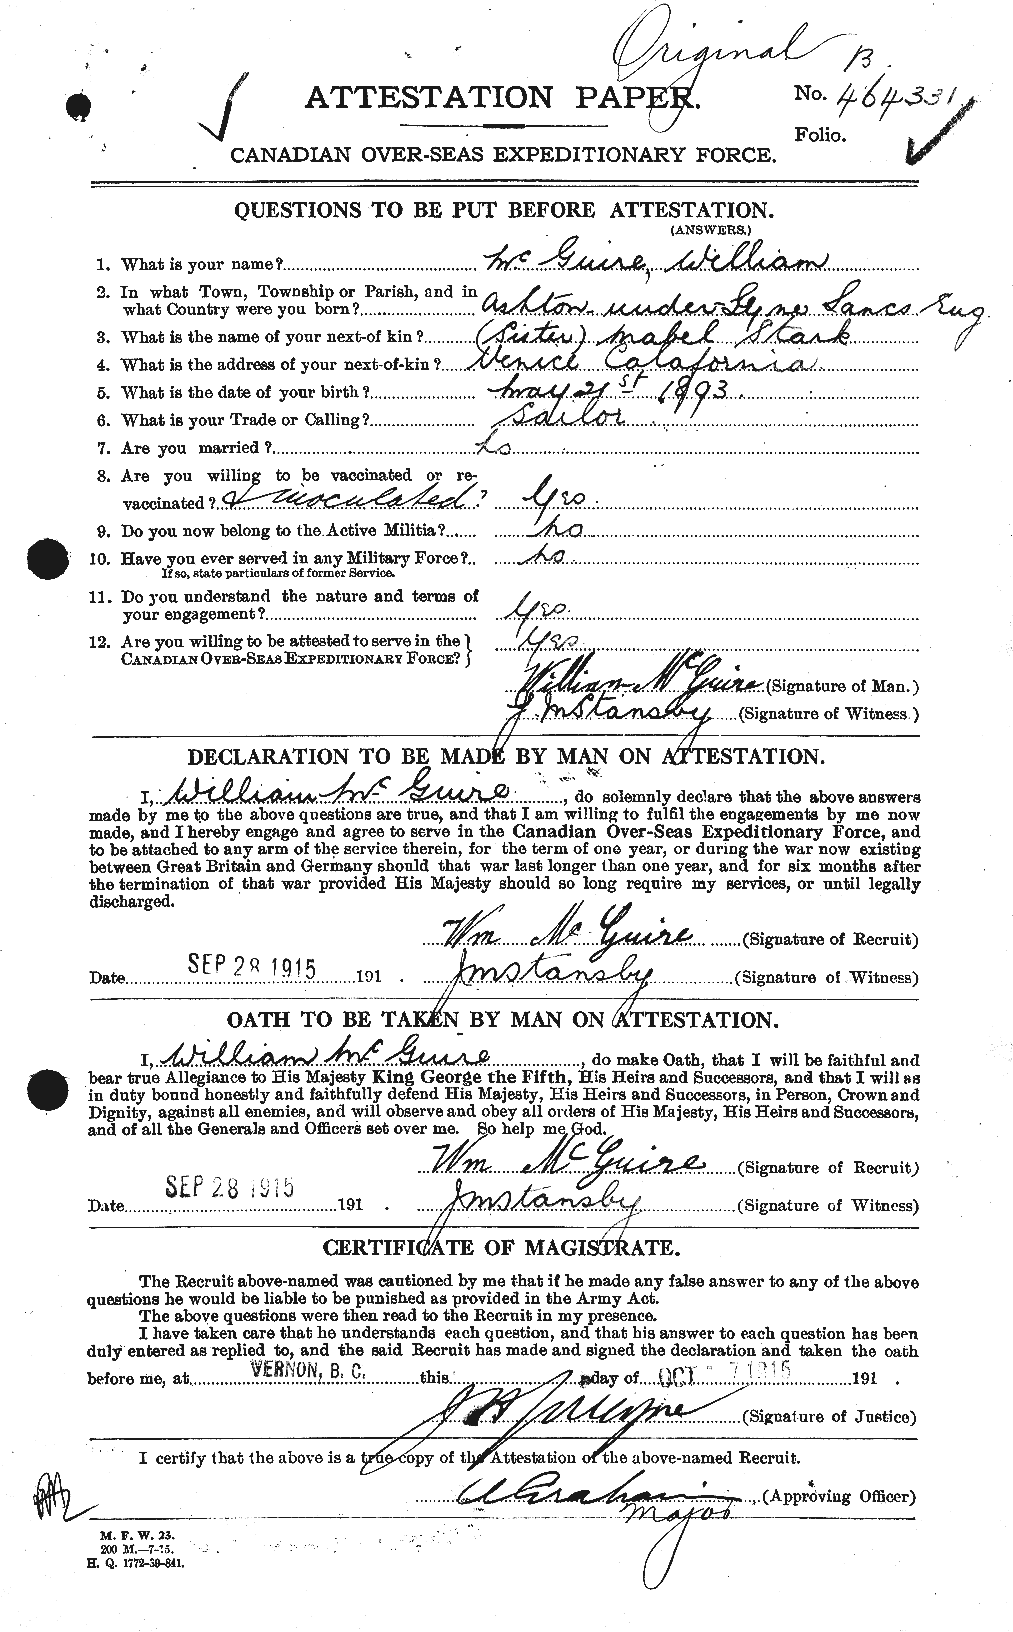 Personnel Records of the First World War - CEF 524137a